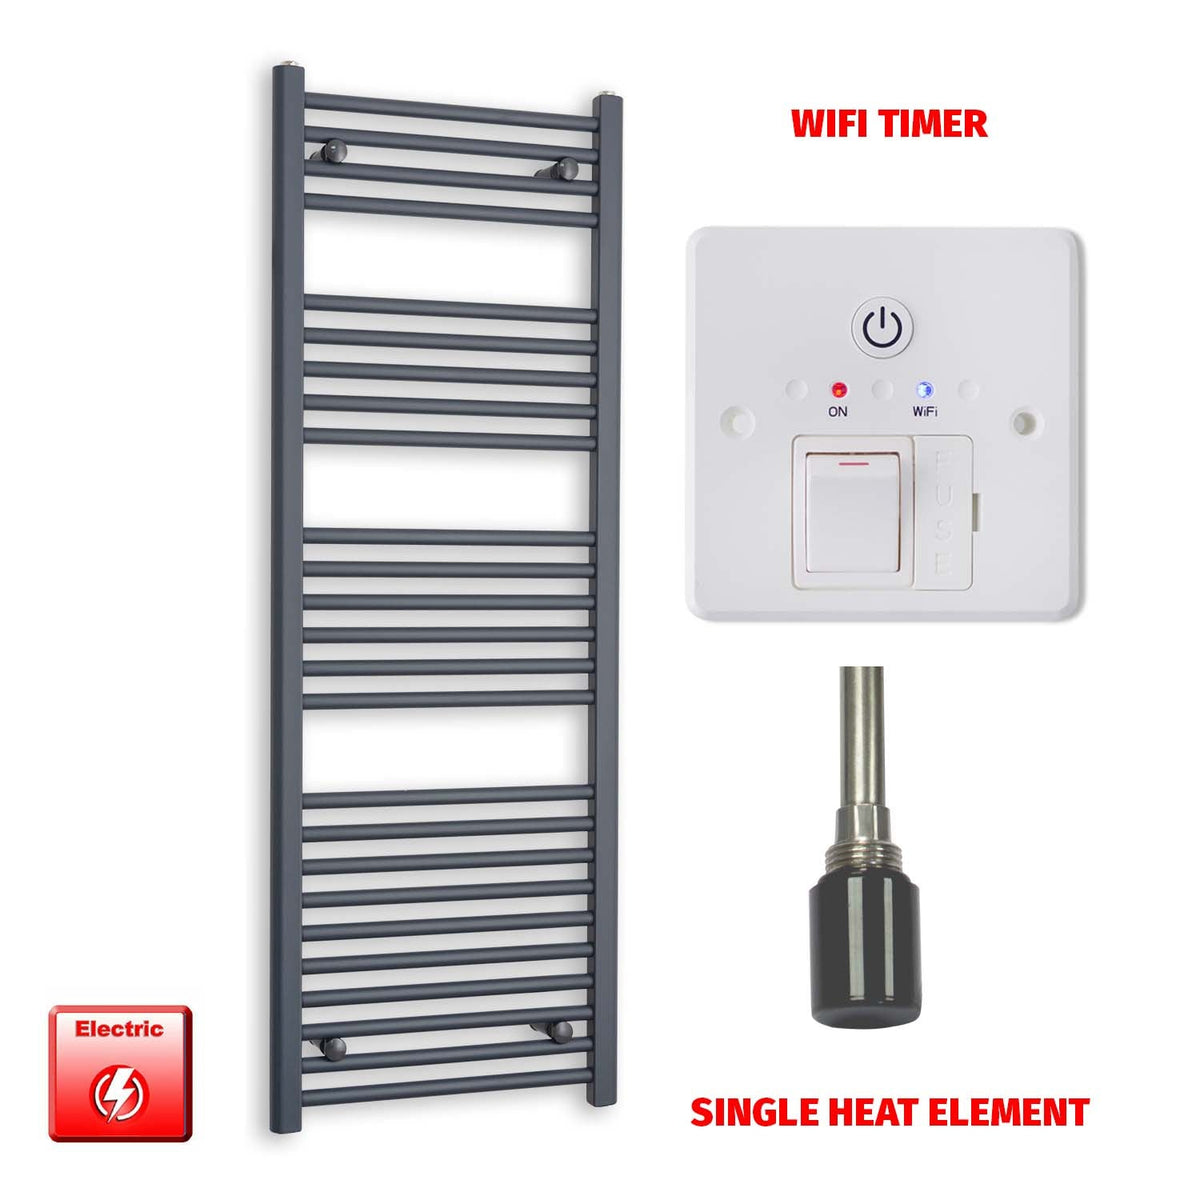 1400mm High 500mm Wide Flat Anthracite Pre-Filled Electric Heated Towel Rail Radiator HTR Single heat element Wifi timer